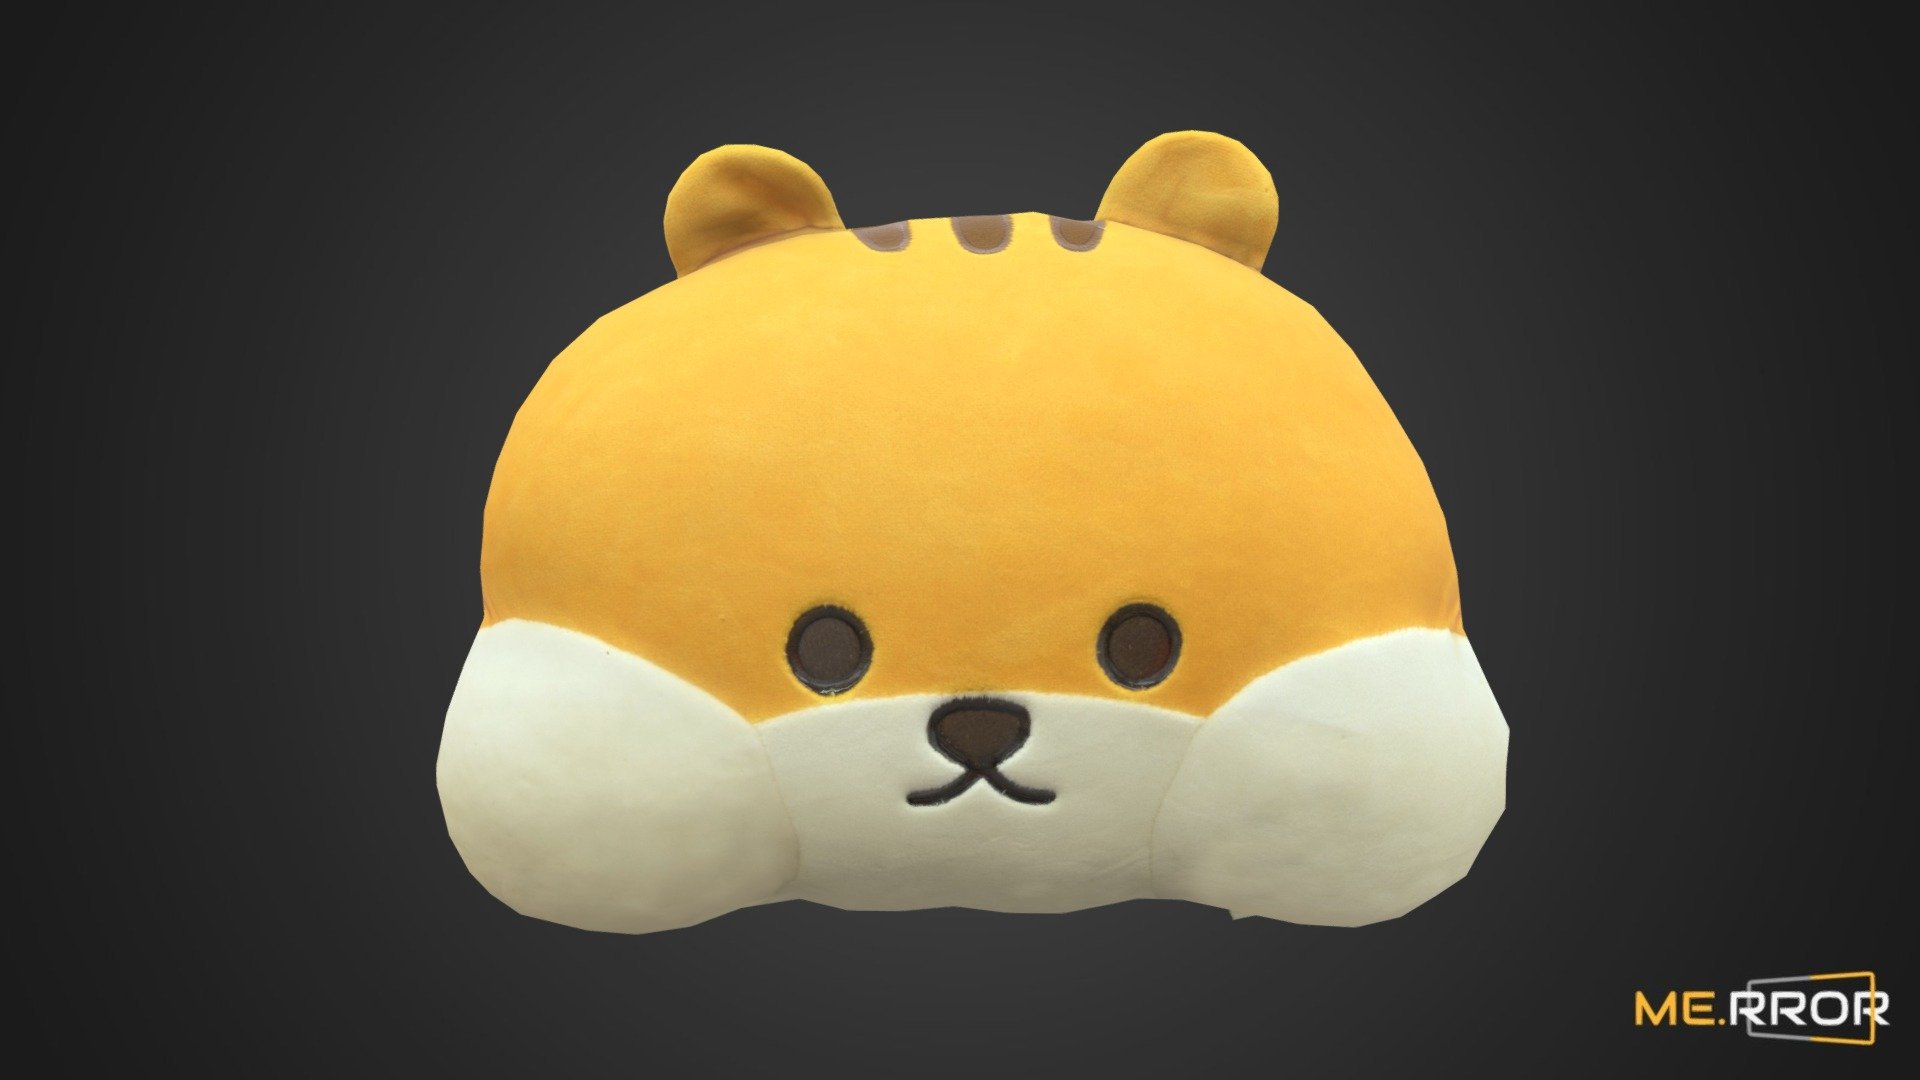 MERROR is a 3D Content PLATFORM which introduces various Asian assets to the 3D world


3DScanning #Photogrametry #ME.RROR - [Game-Ready] Squirrel Cushion - Buy Royalty Free 3D model by ME.RROR Studio (@merror) 3d model